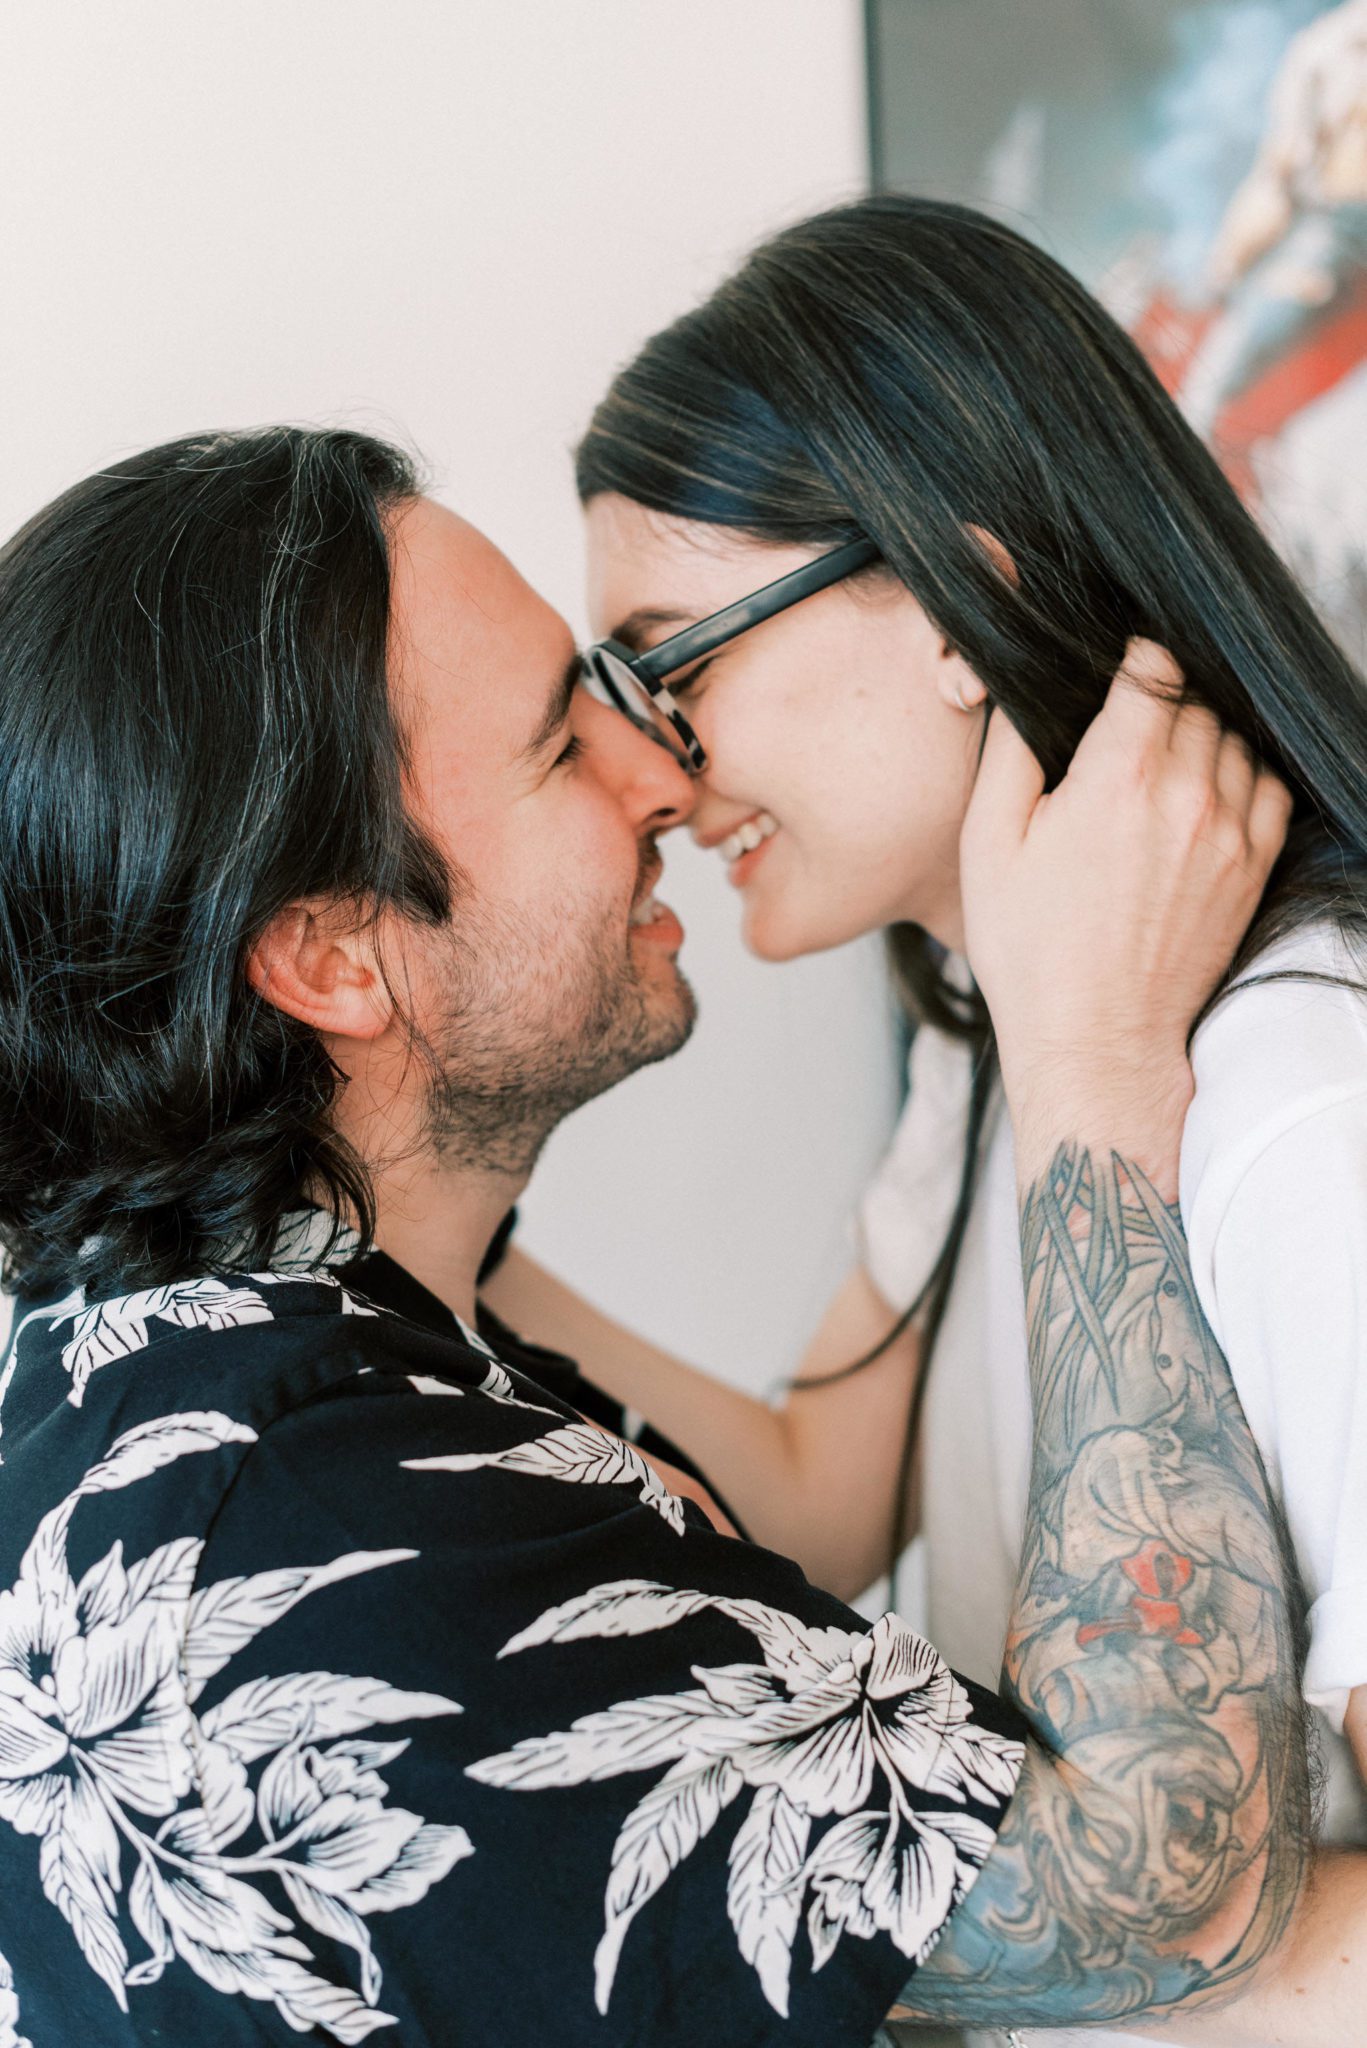 Engagement session filled with bold patterns and retro vibes